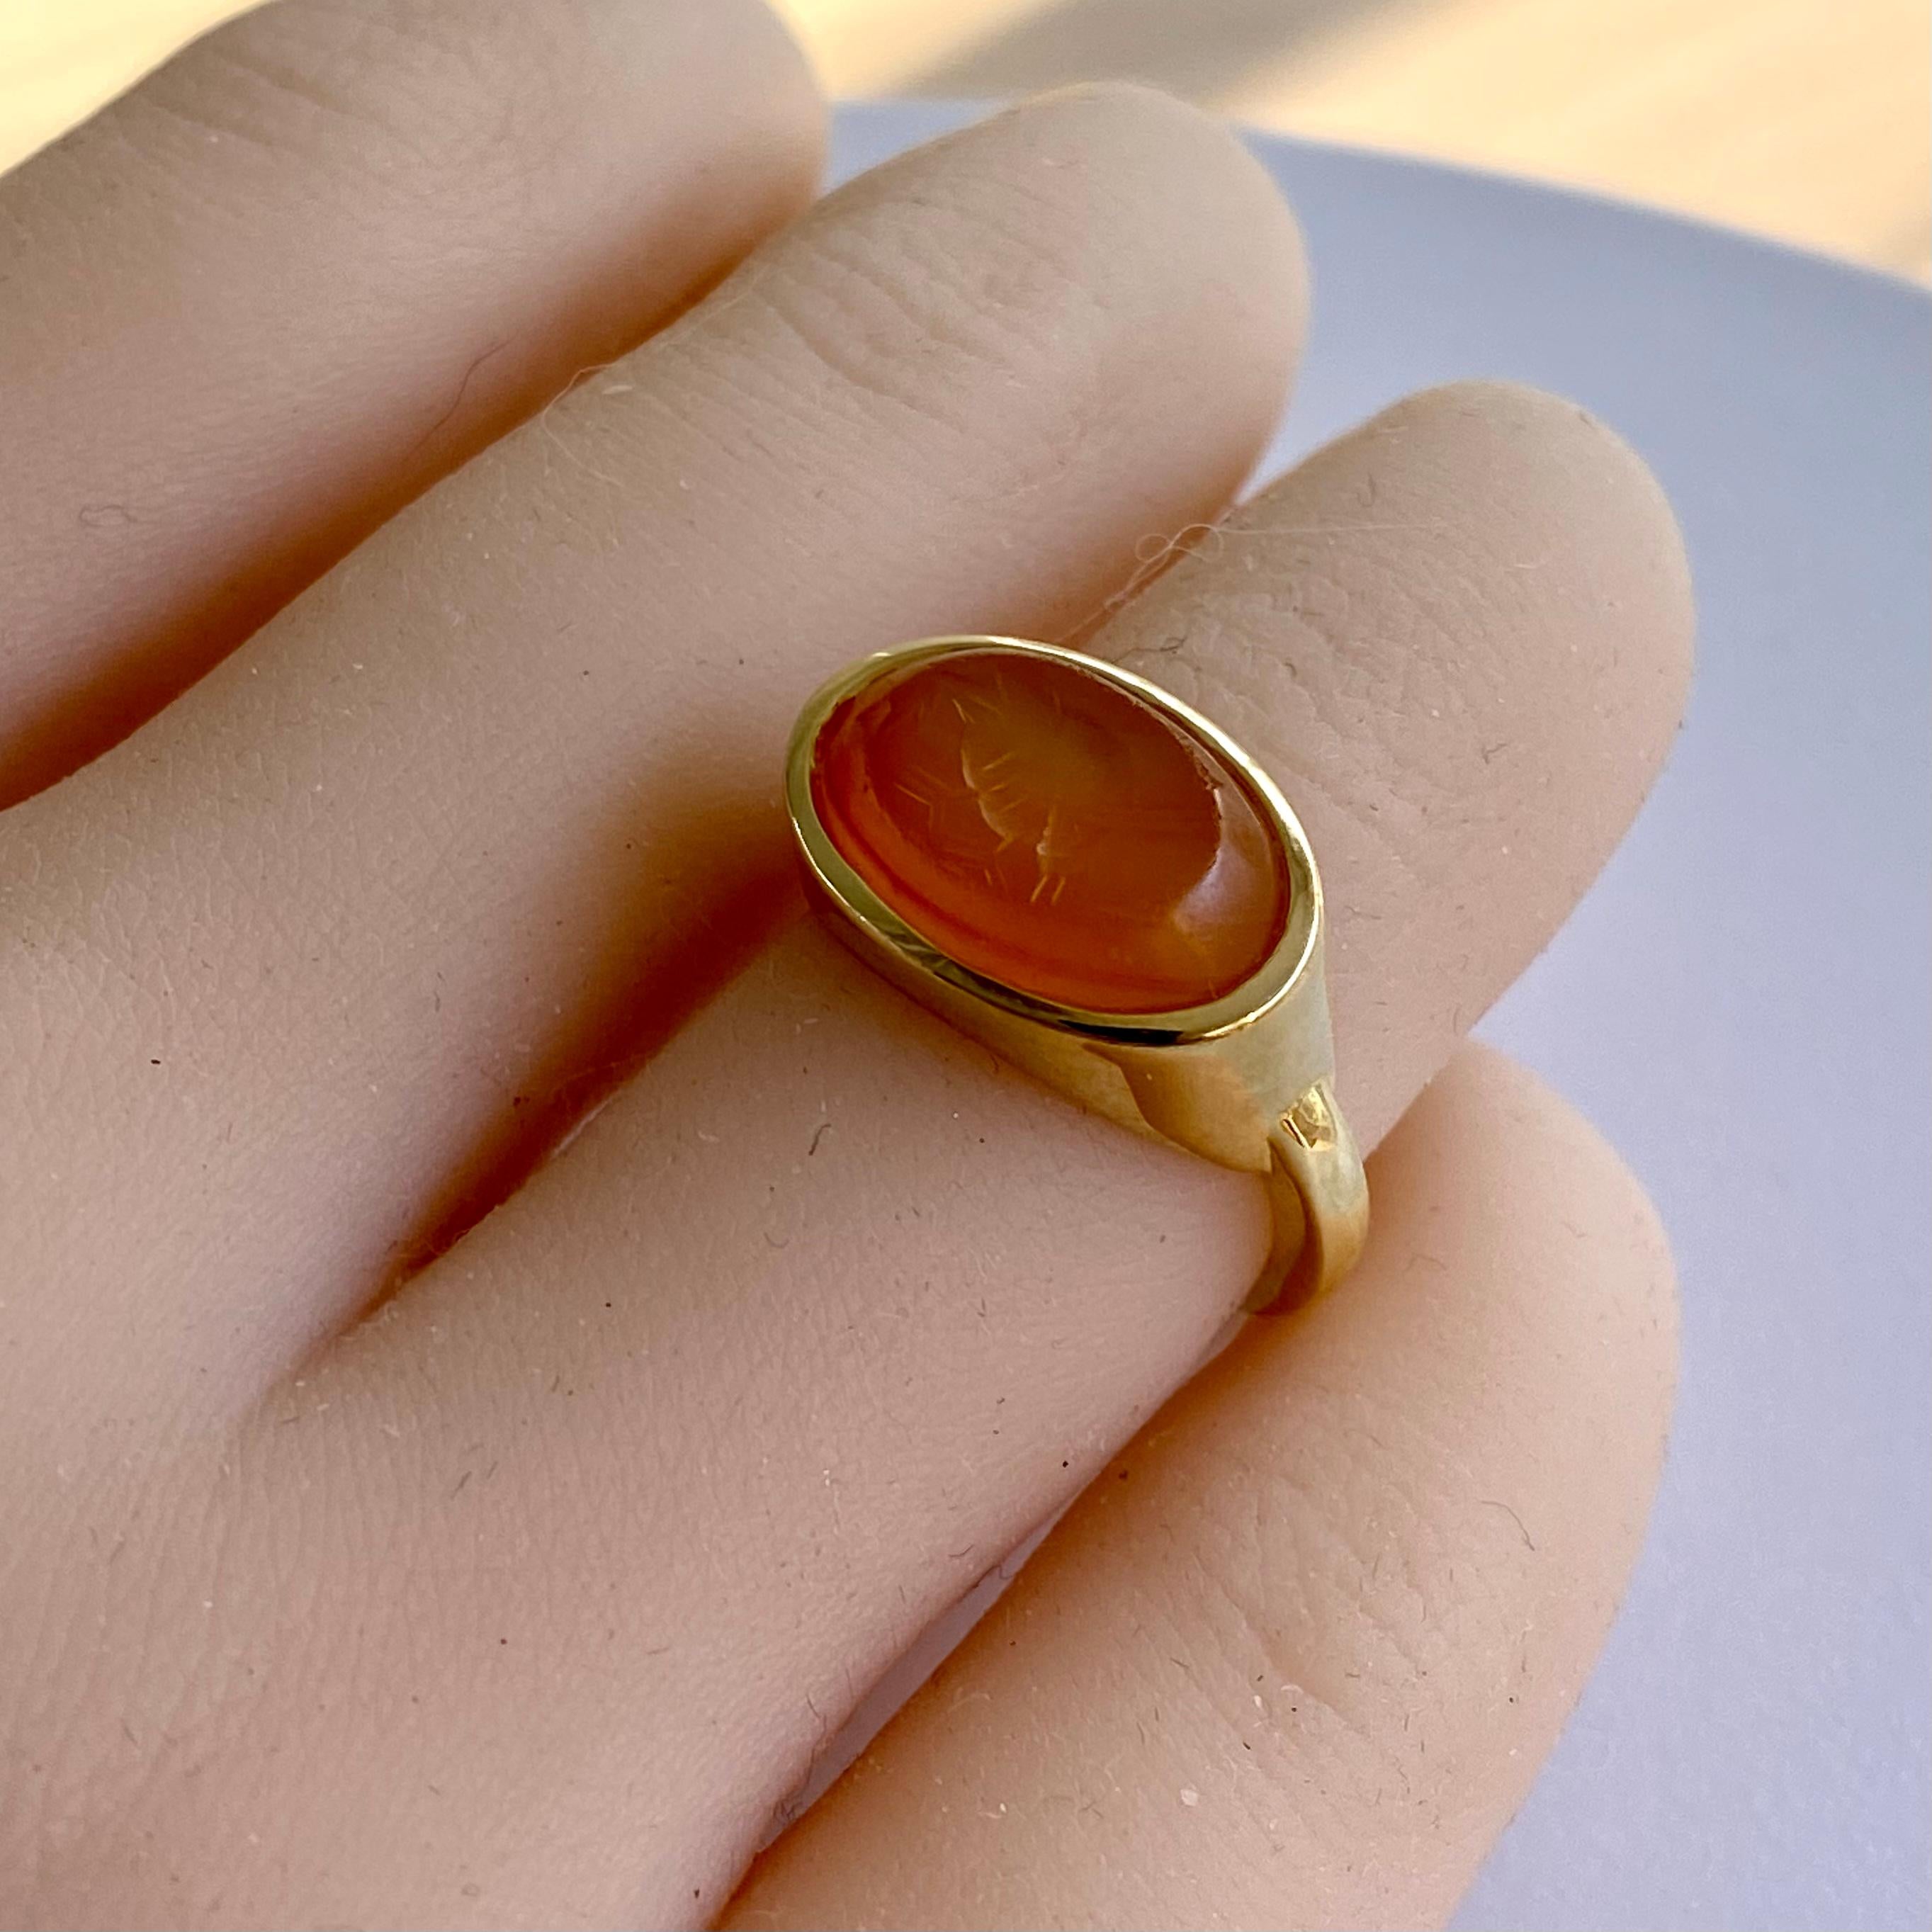 seal set into a ring